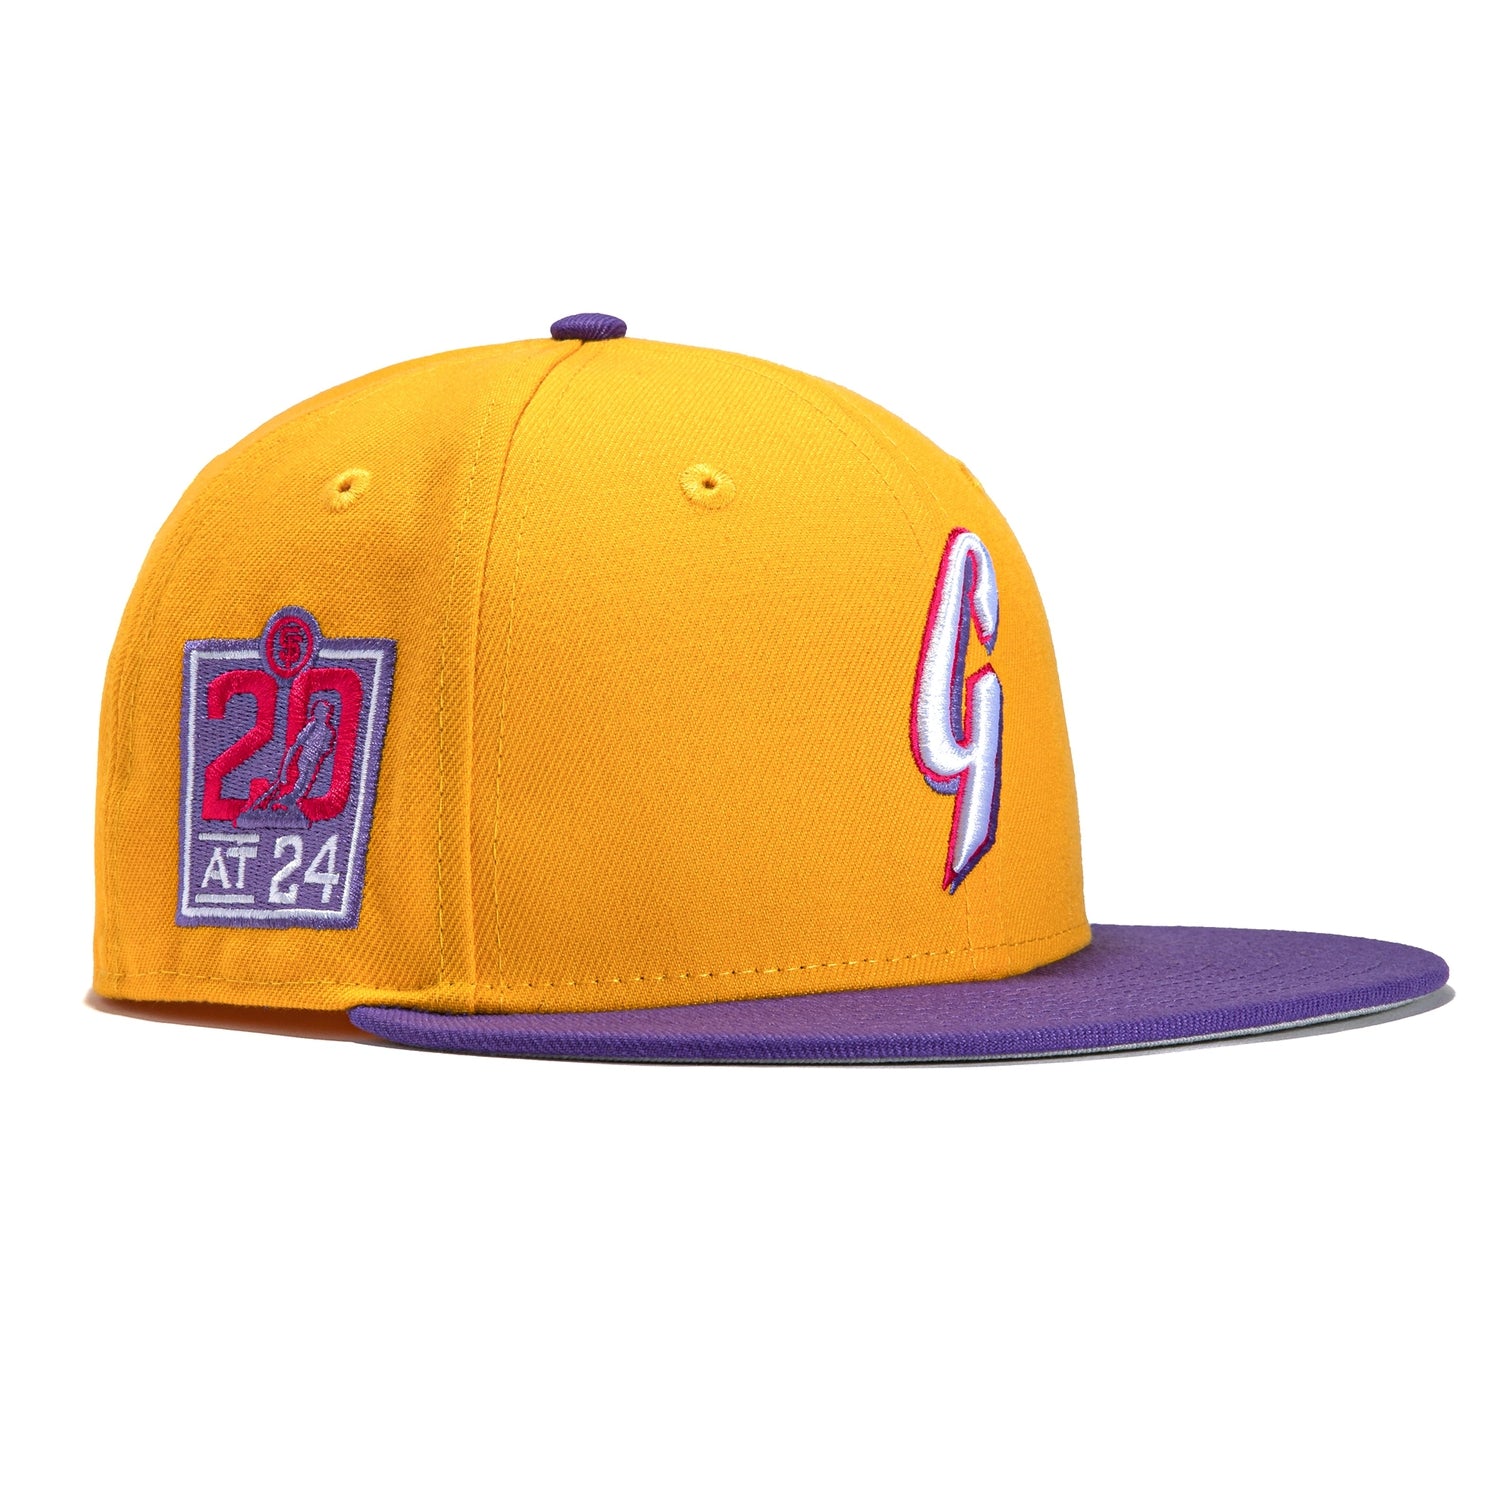 New Era LA Lakers Cap In Grey - Fast Shipping & Easy Returns - City Beach  United States